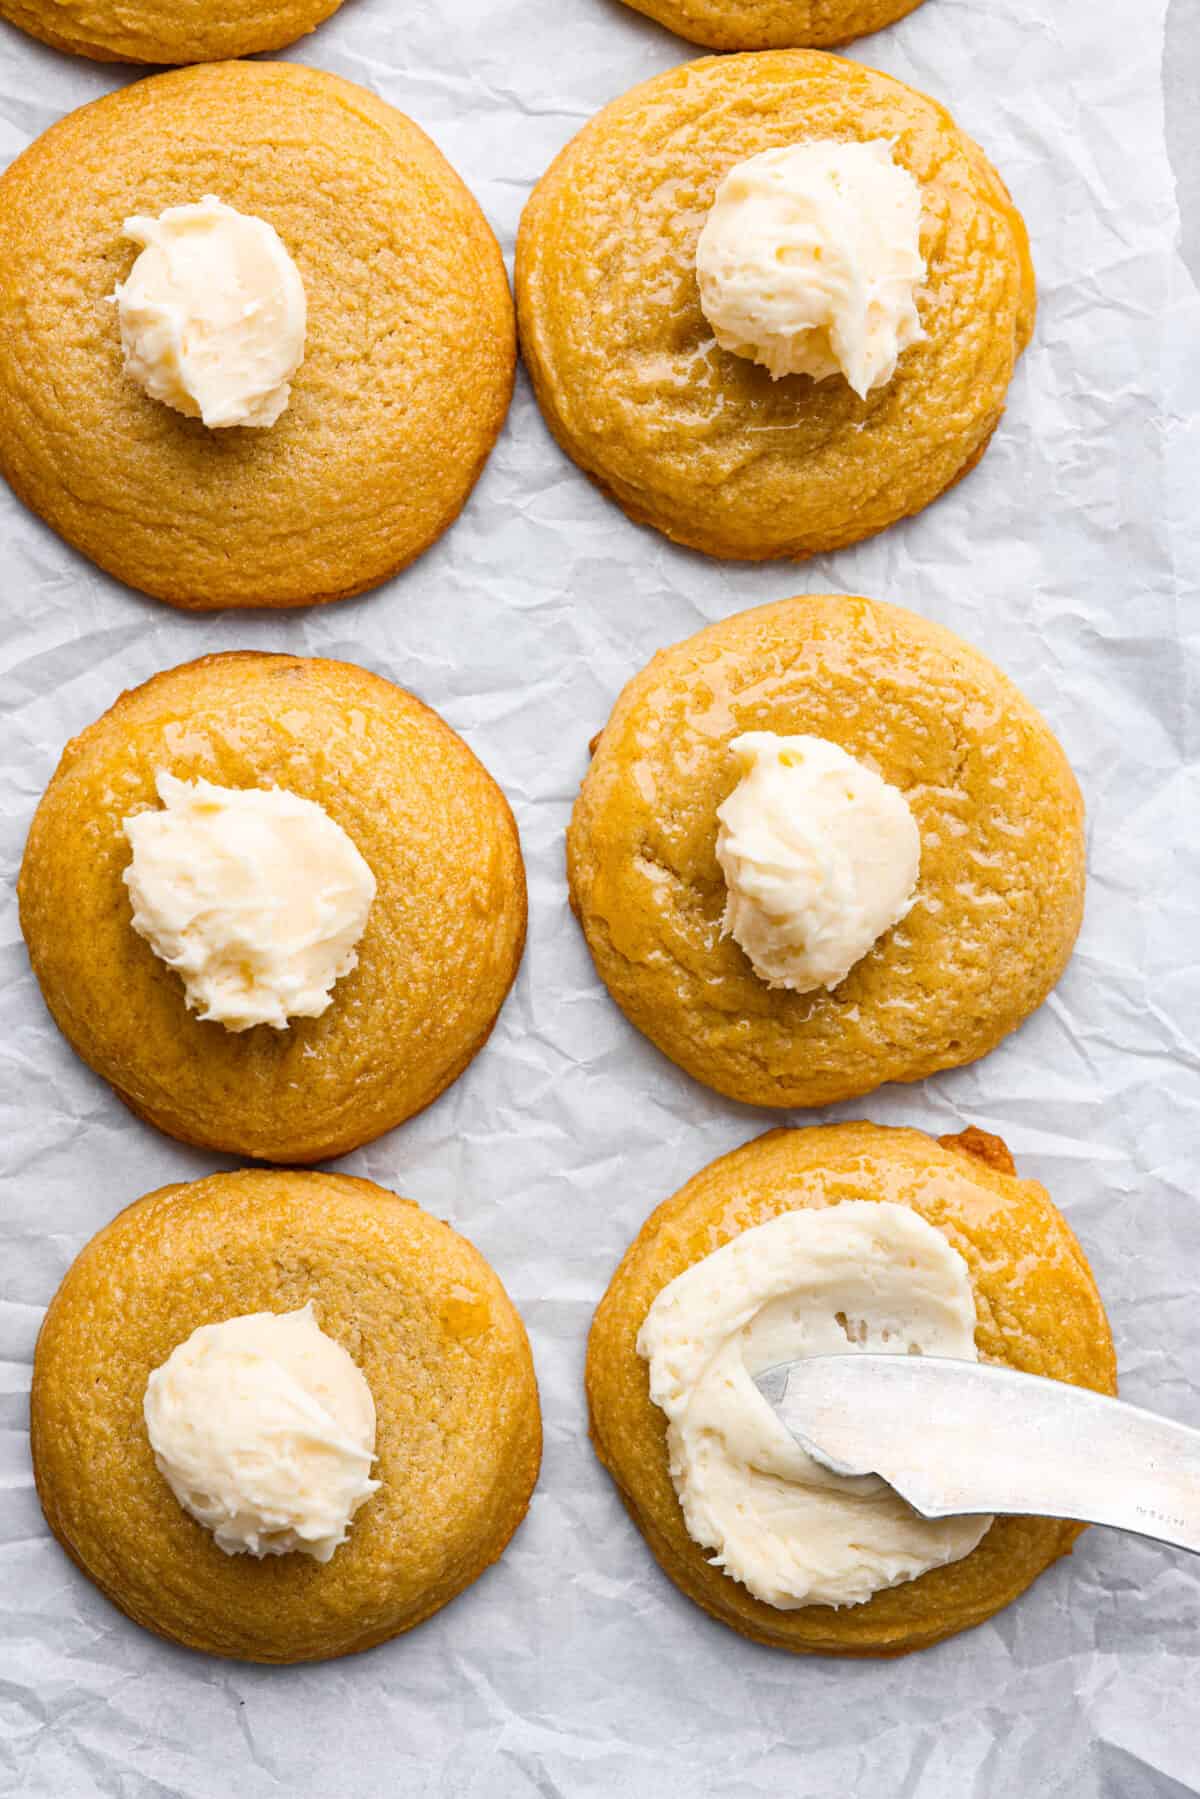 Top view of cornbread cookies with a dollop of frosting on top of each cookie. A knife is spreading the frosting on one of the cookies.